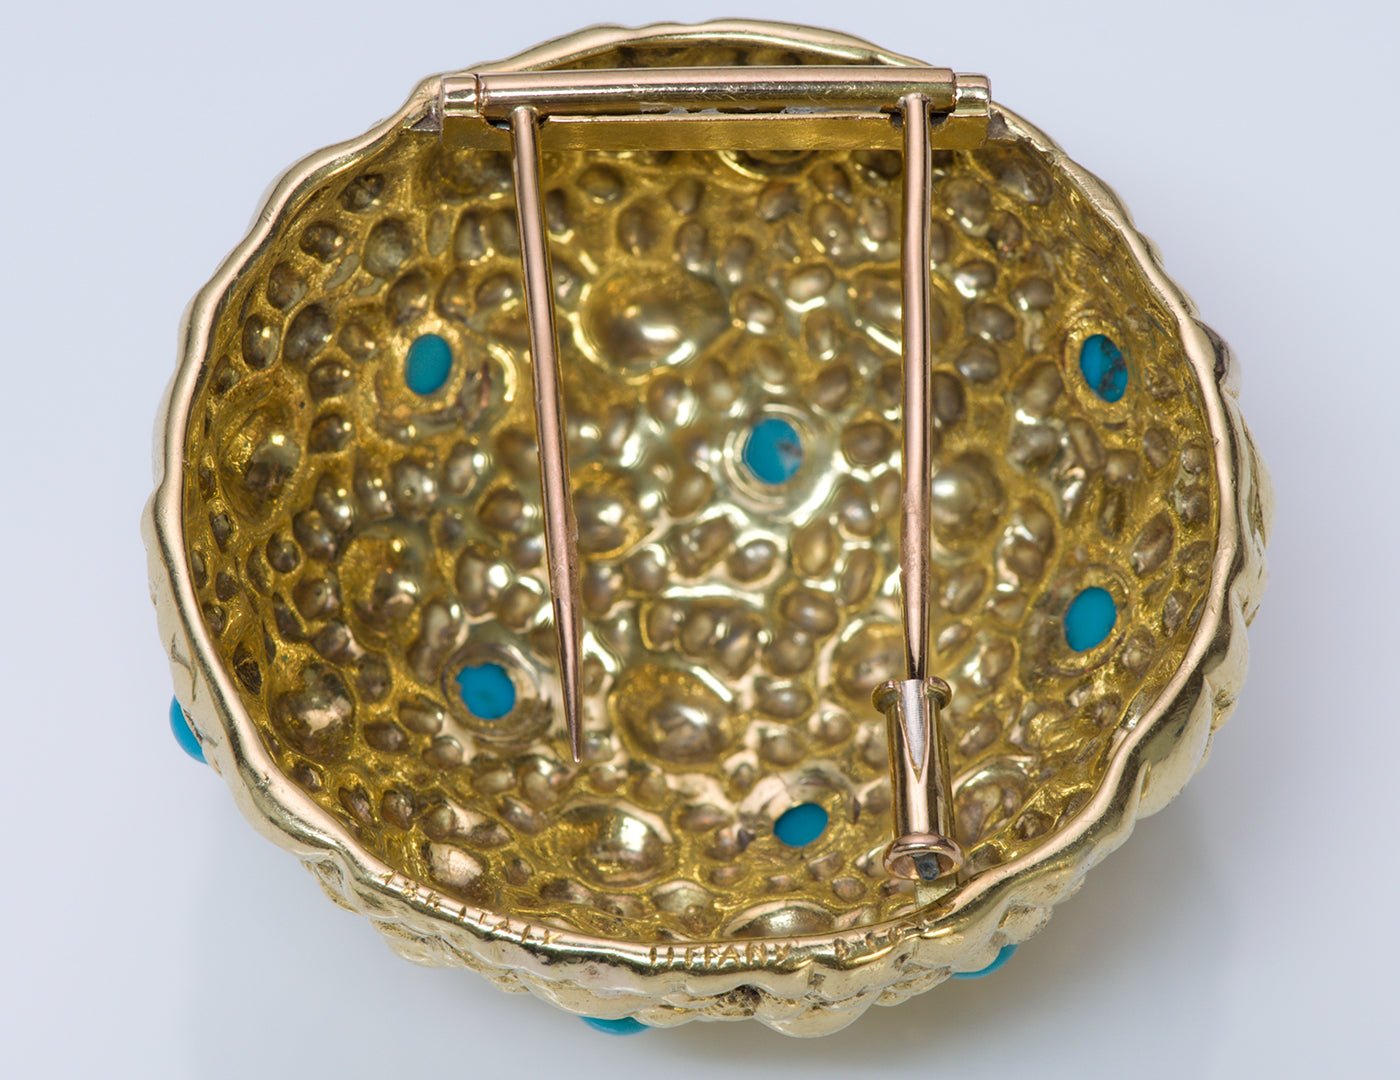 Tiffany & Co. Dome Gold Turquoise Brooch